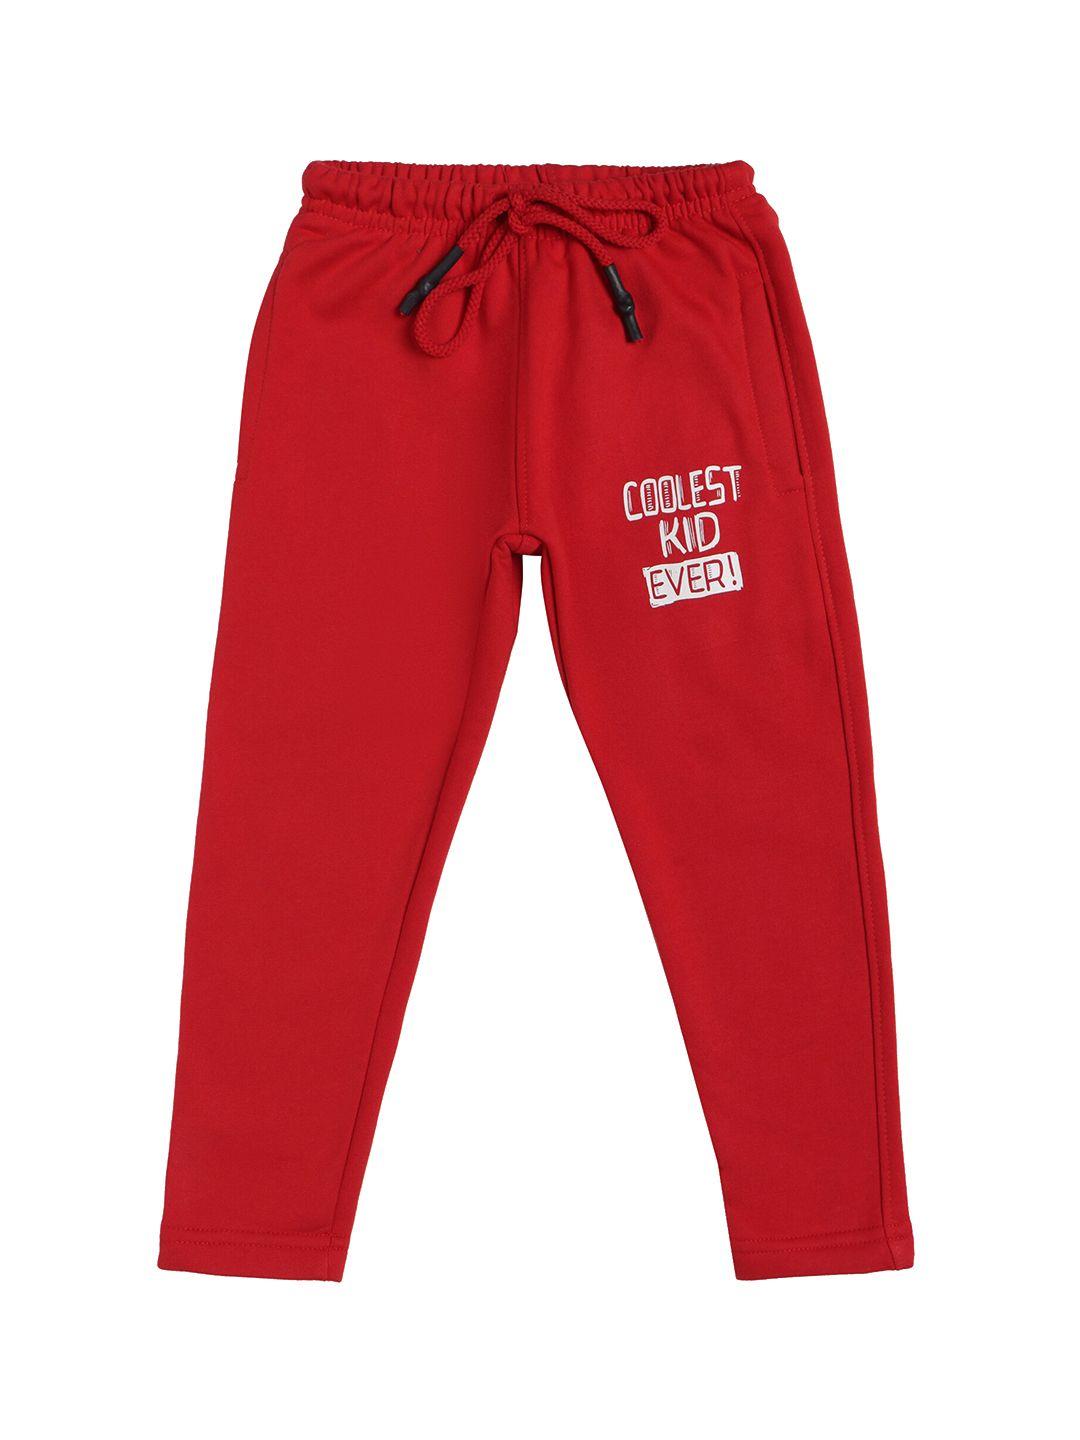 DYCA Boys Red Solid Regular Fit Cotton Track Pants